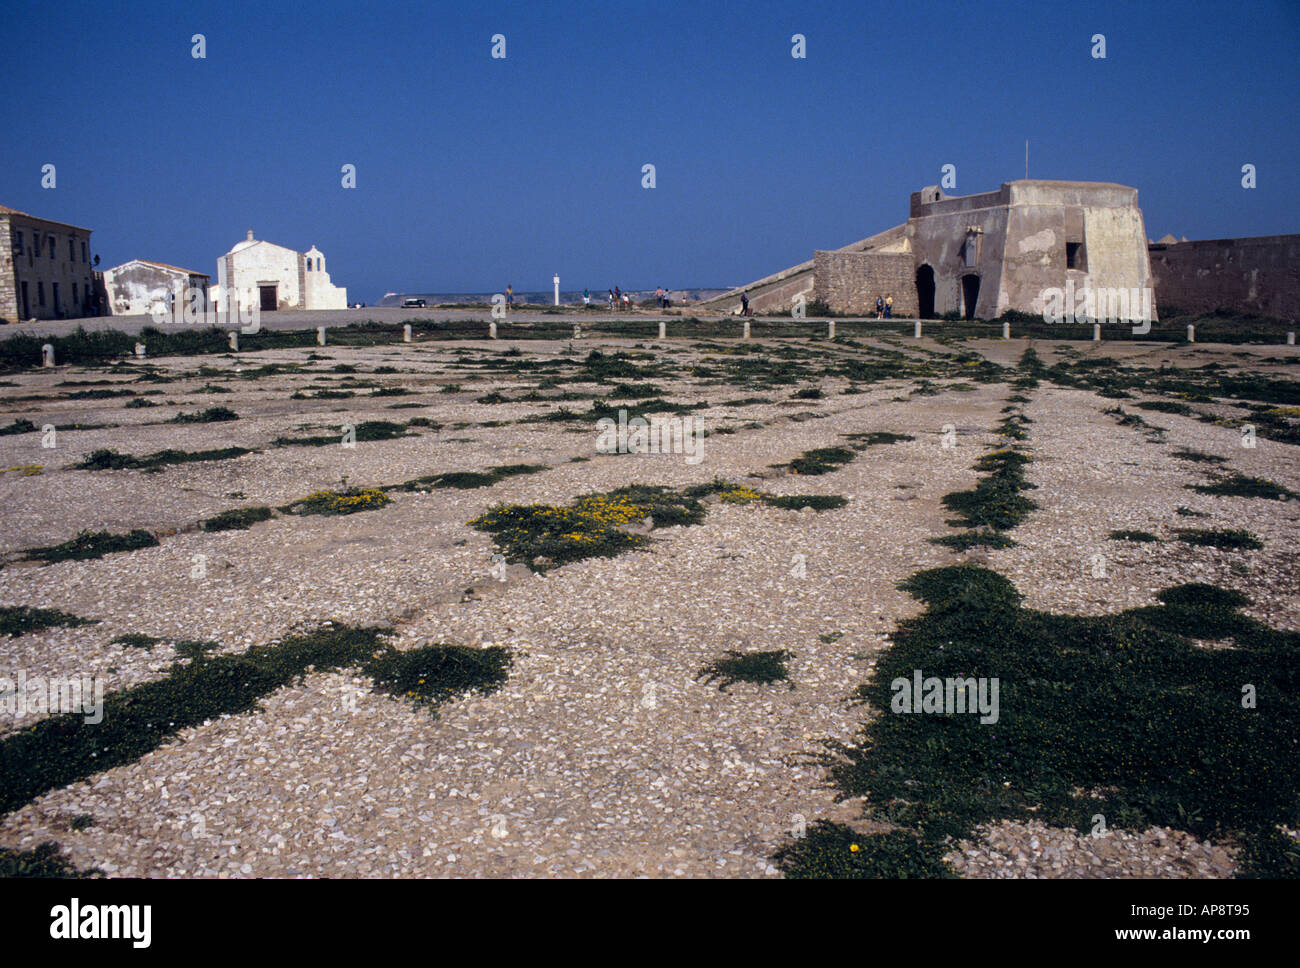 Part of the Rosa dos Ventos wind or rose compass in the fortress of Fortaleza de Sagres Algarve Portugal Europe Stock Photo